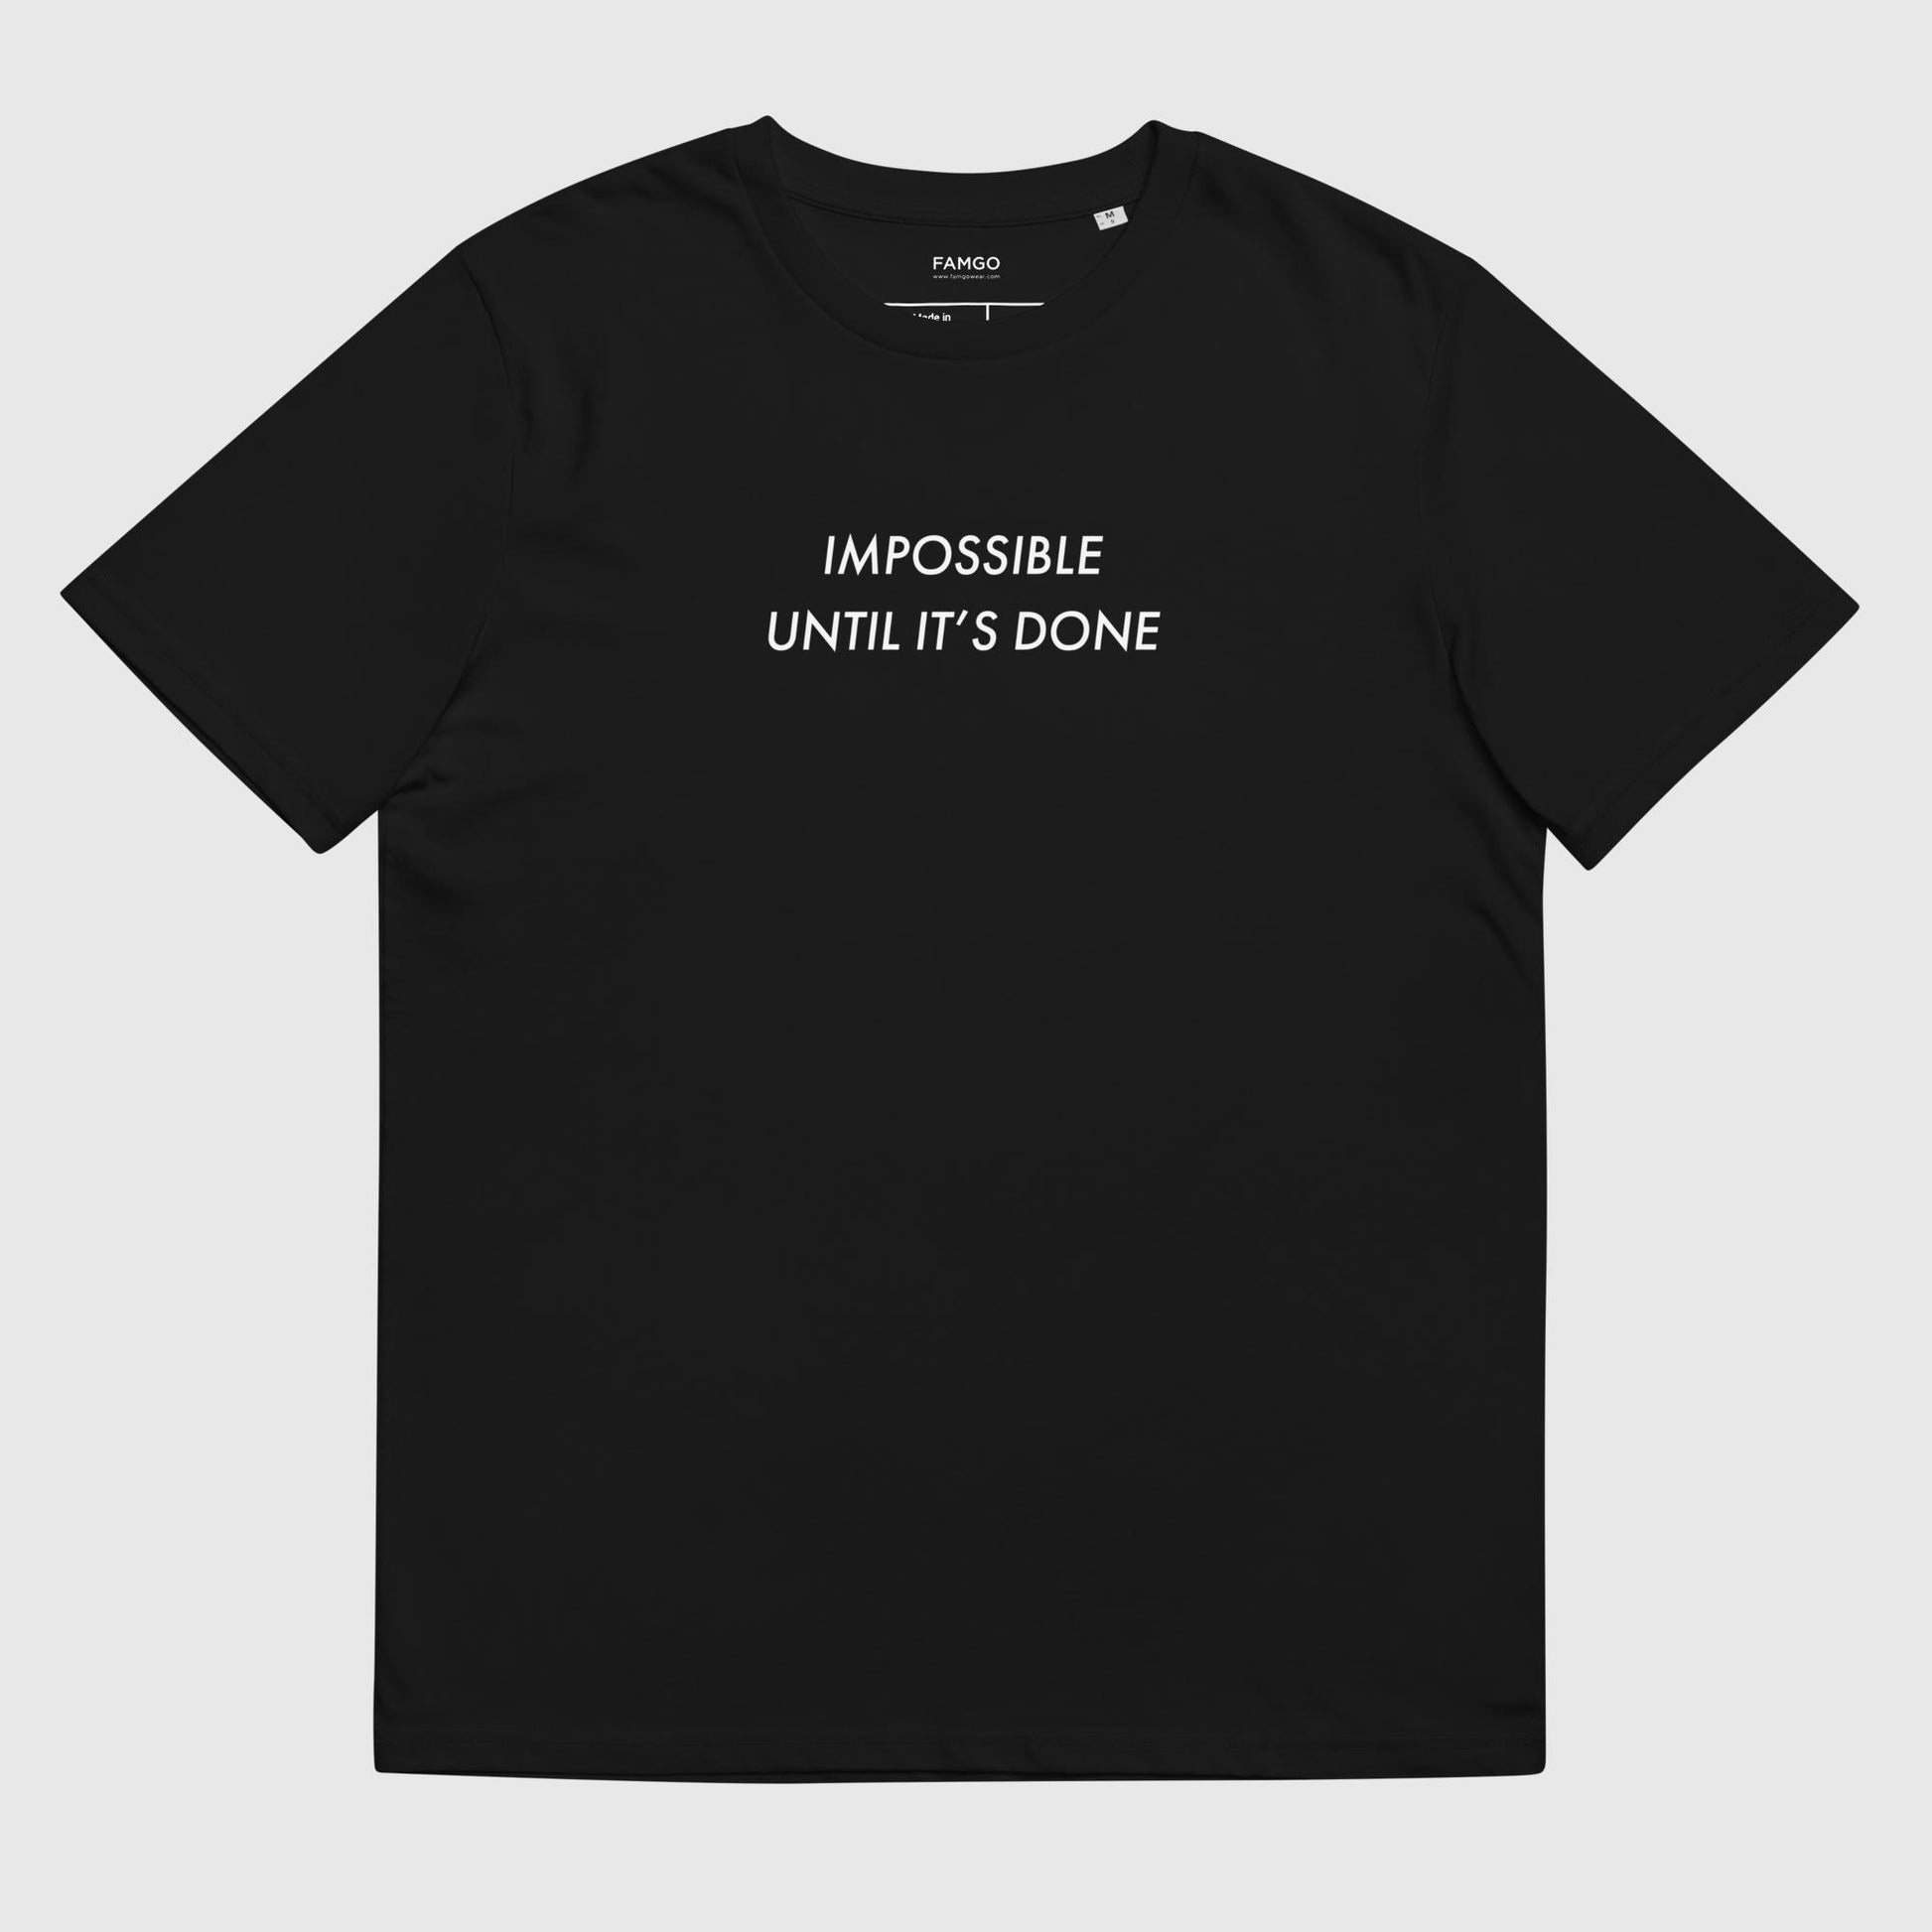 Men's black organic cotton t-shirt that features, "Impossible Until It's Done," inspired by Nelson Mandela's inspirational quote, "It always seems impossible until it's done."